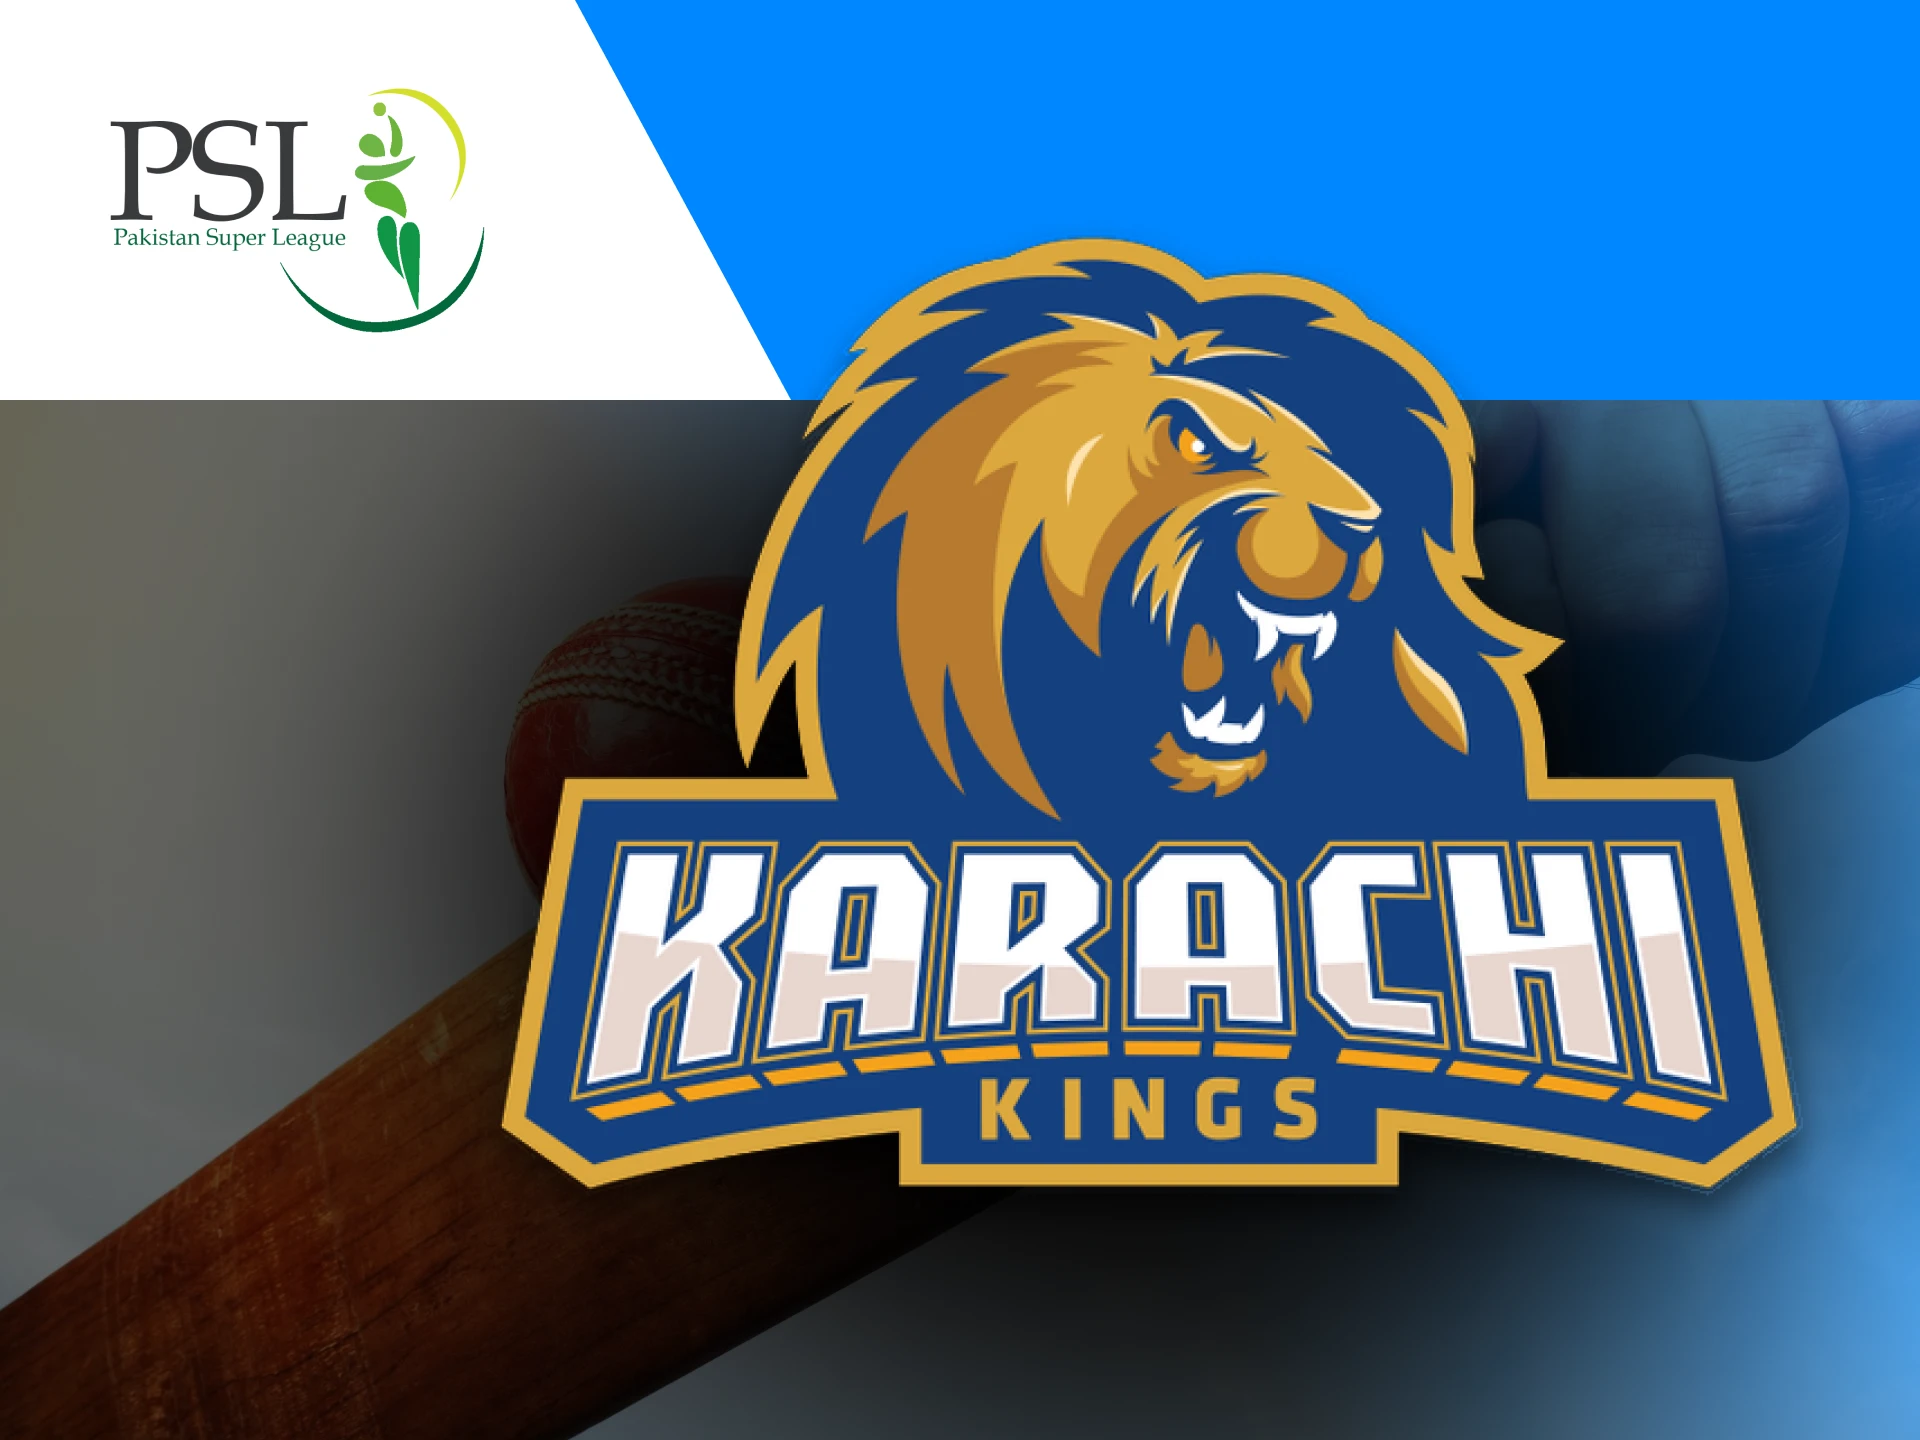 The Karachi Kings is a professional T20 cricket team located in Karachi.